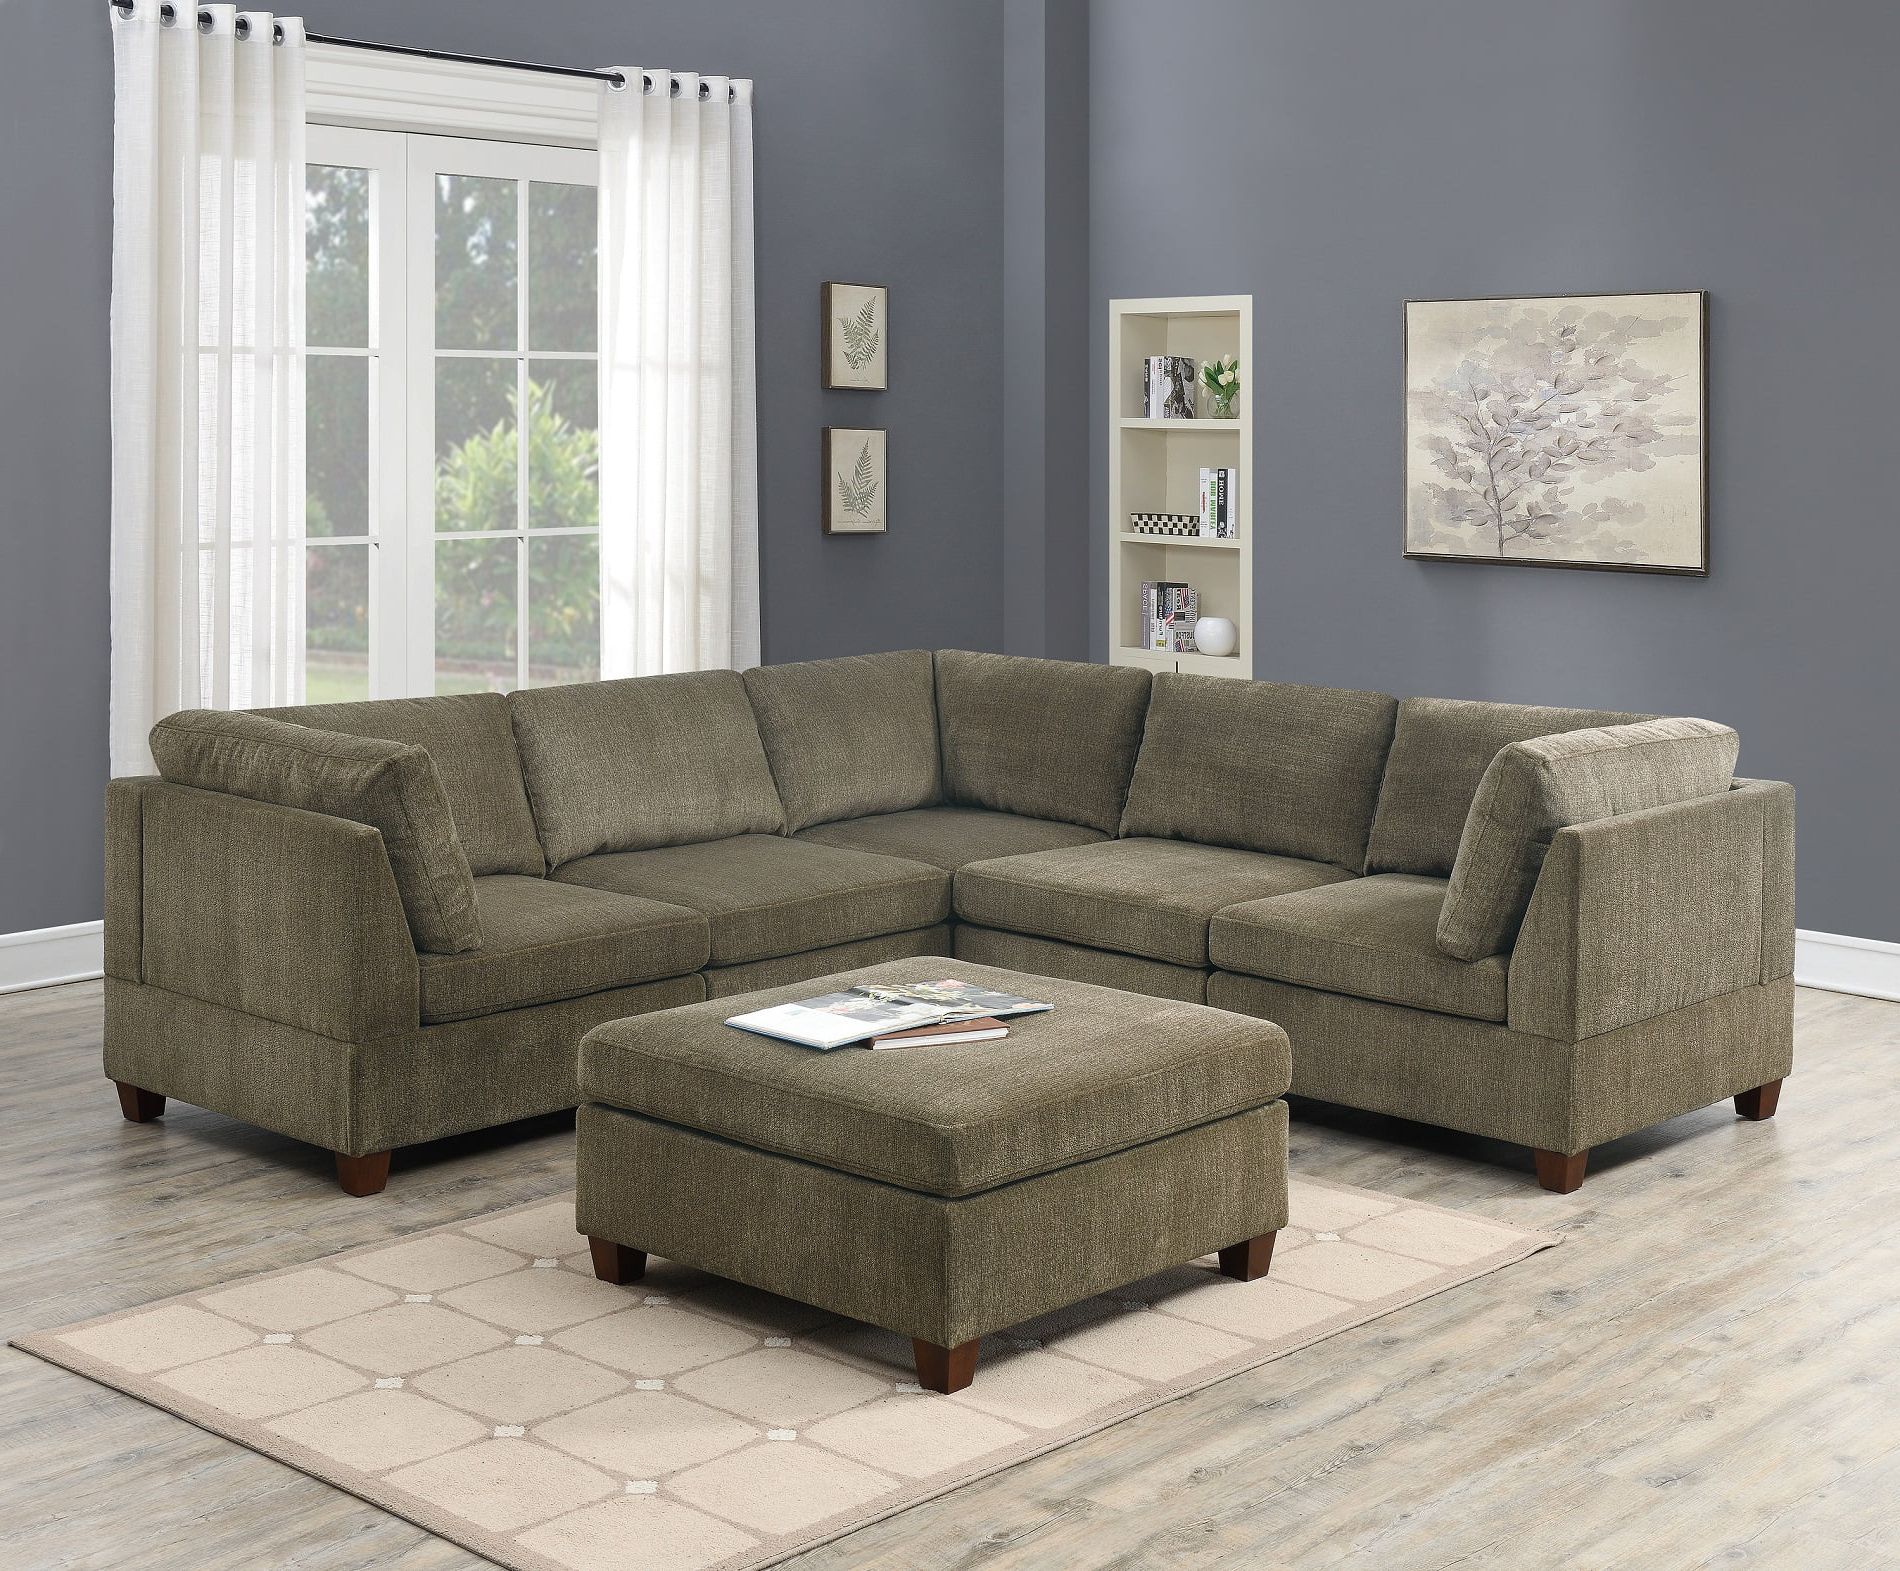 Widely Used Chenille Sectional Sofas Intended For Contemporary Modern Unique Modular 6pc Sectional Sofa Set Tan Chenille (View 8 of 15)